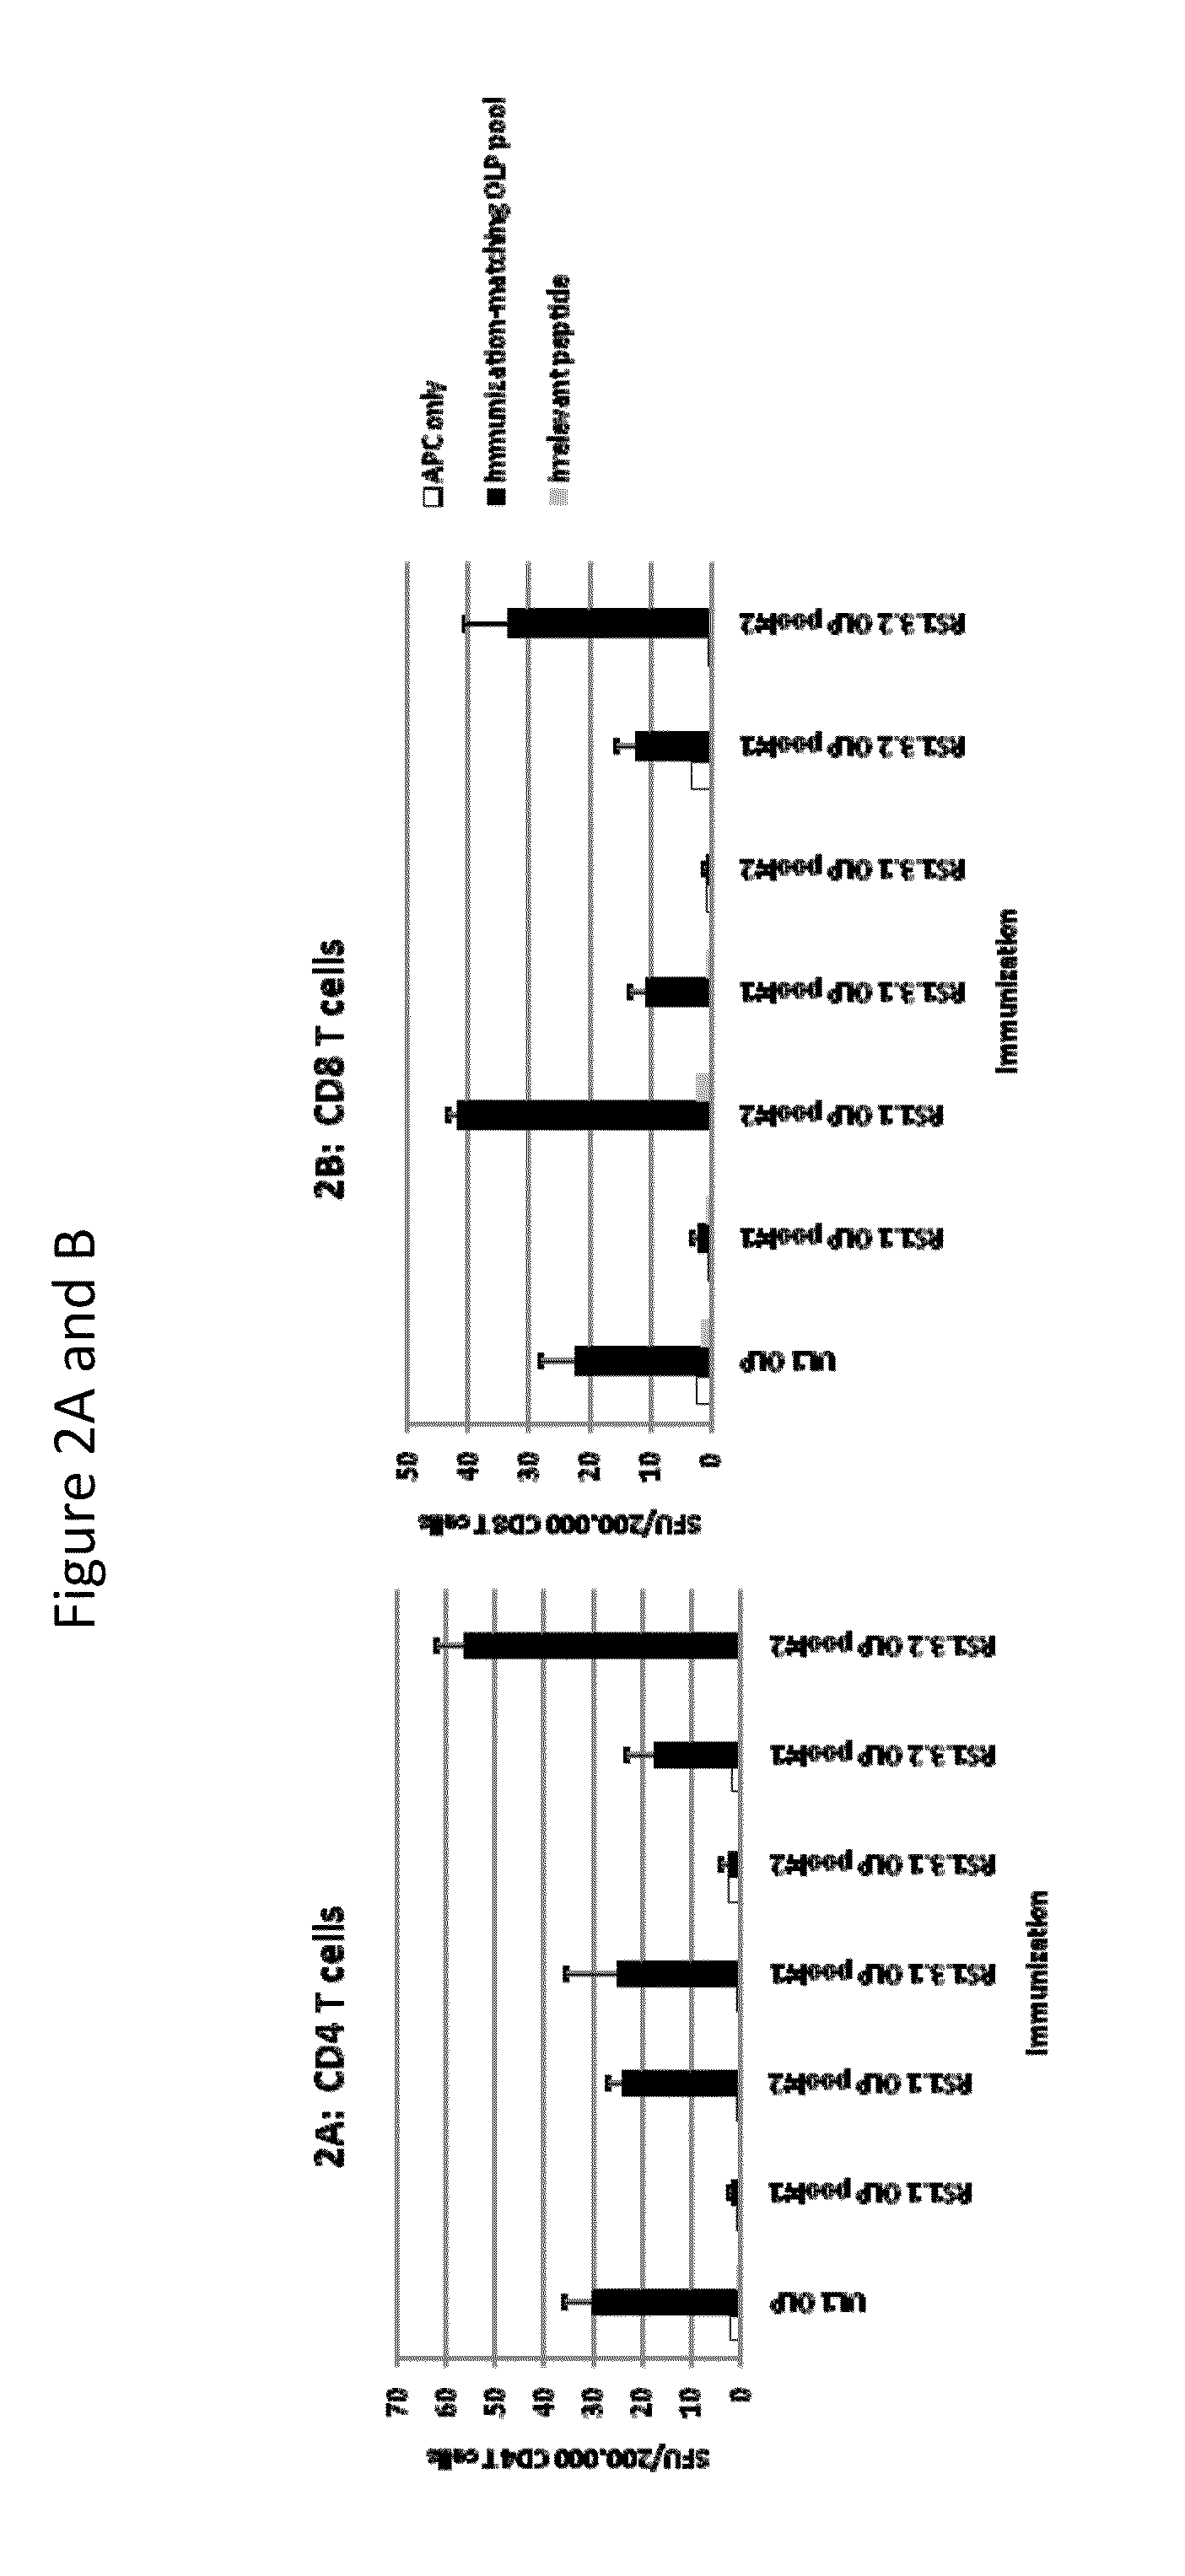 Vaccines against herpes simplex virus type 2: compositions and methods for eliciting an immune response